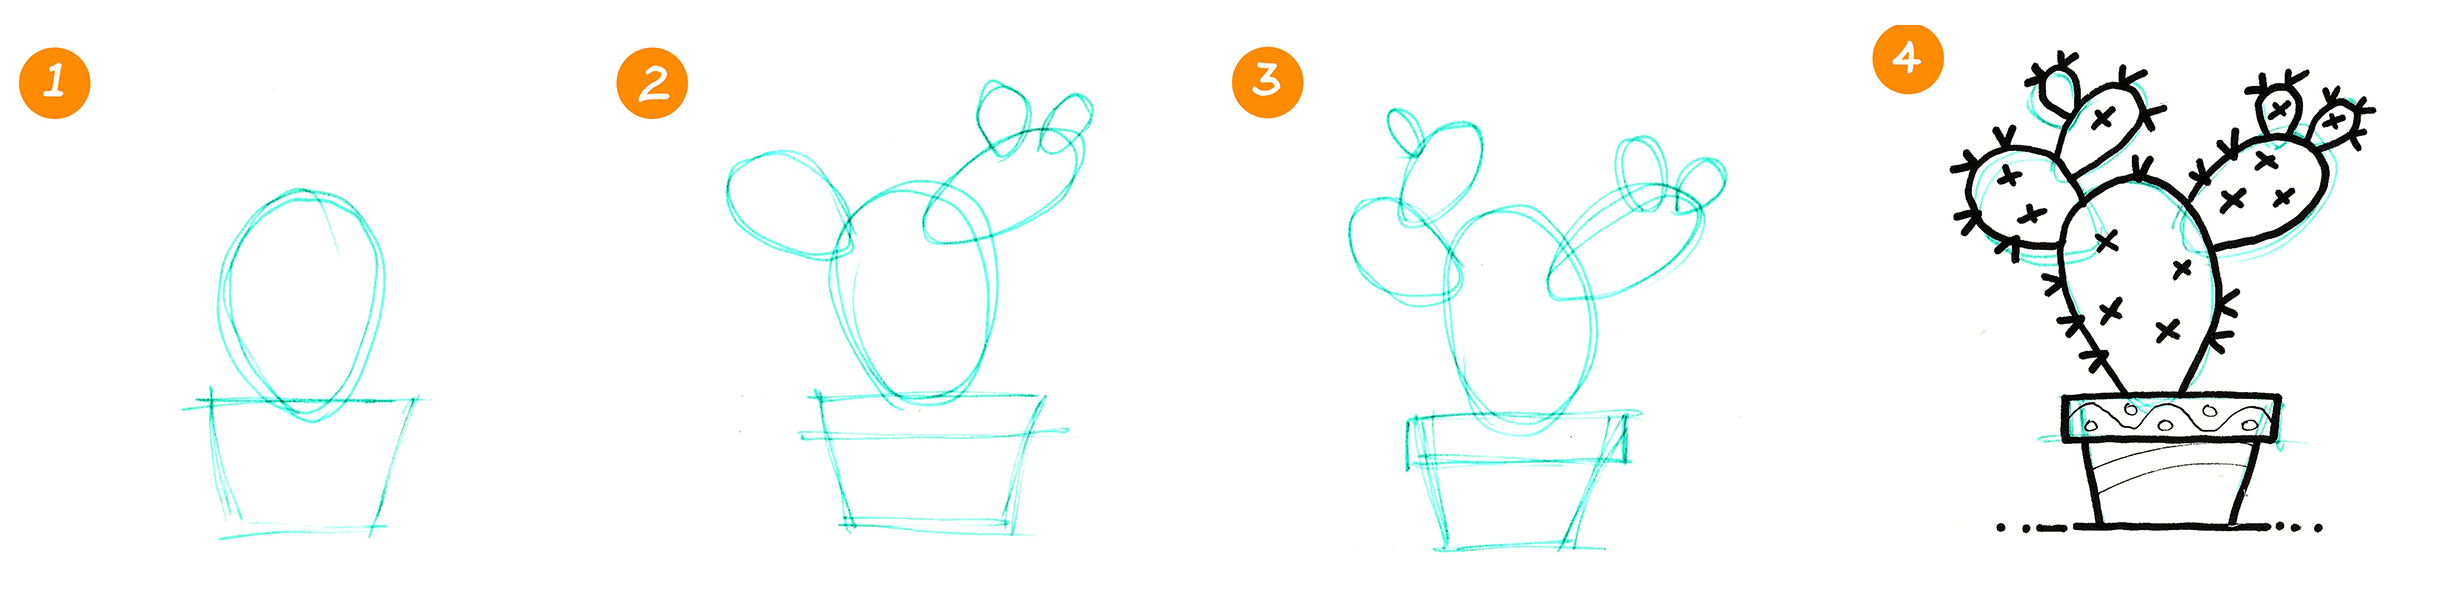 How to draw a cactus using the foundation lines technique, from the Draw in 4~! ebook